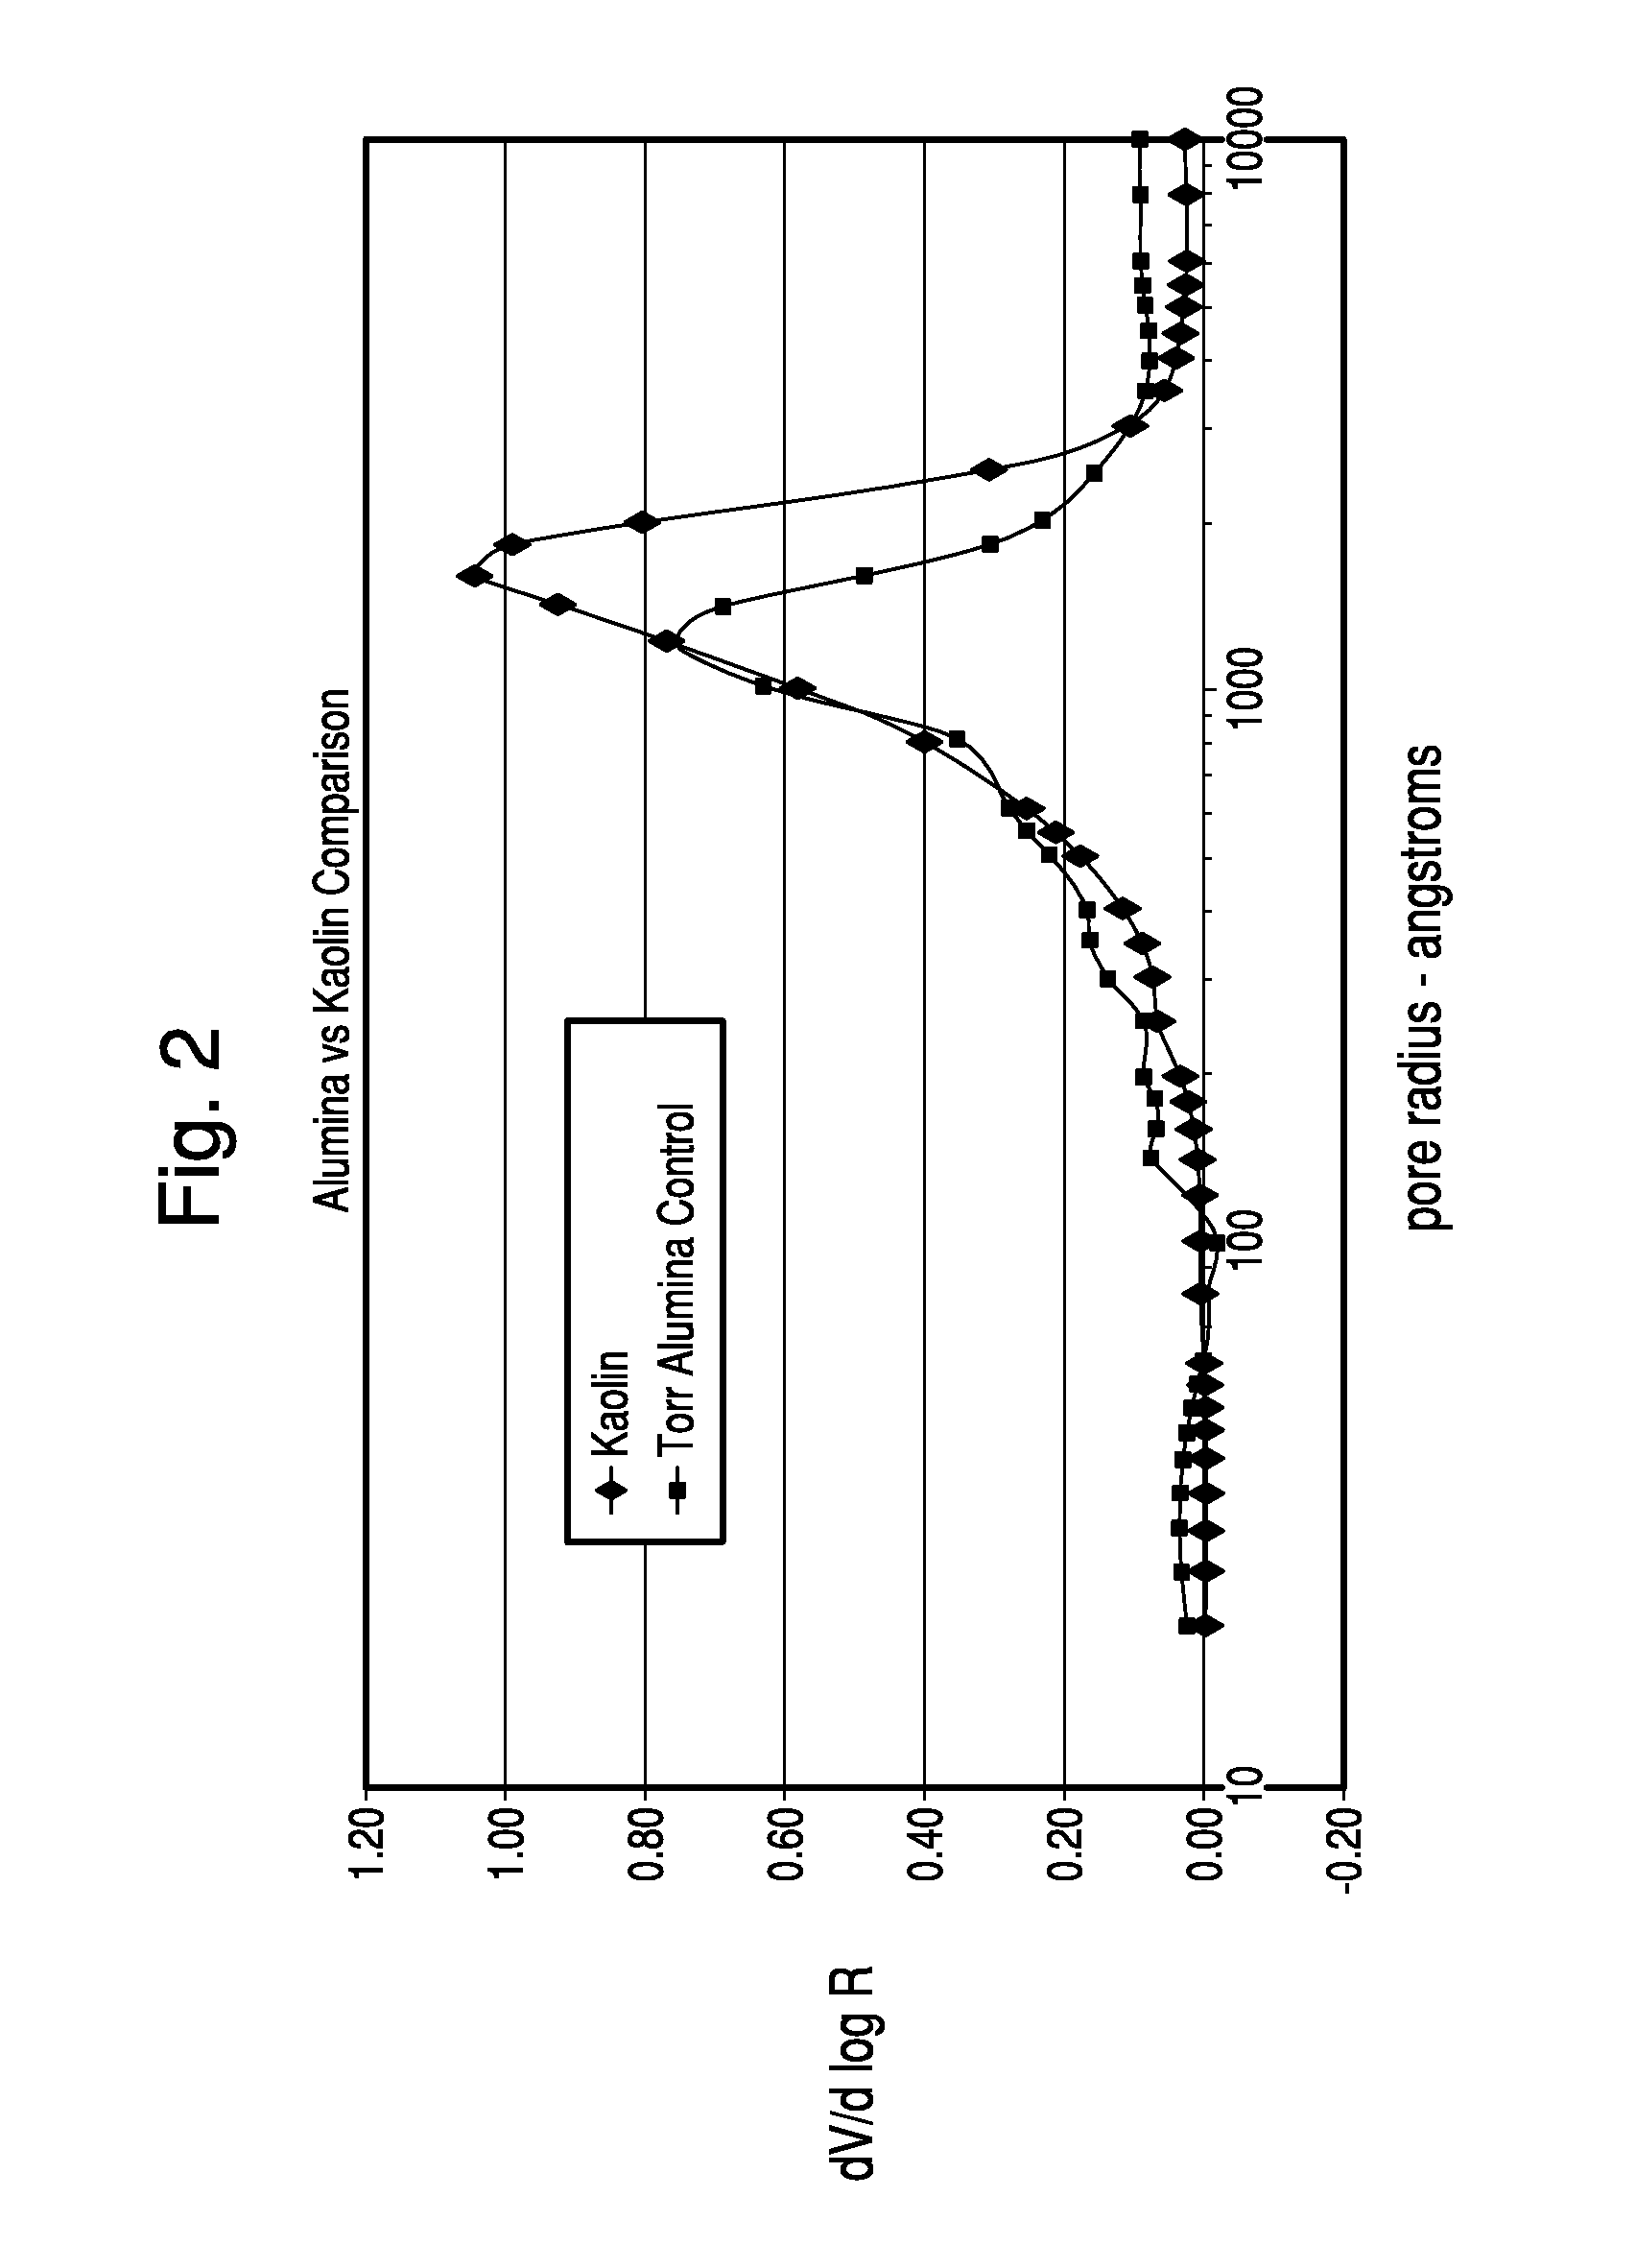 Thermochemical structuring of matrix components for FCC catalysts